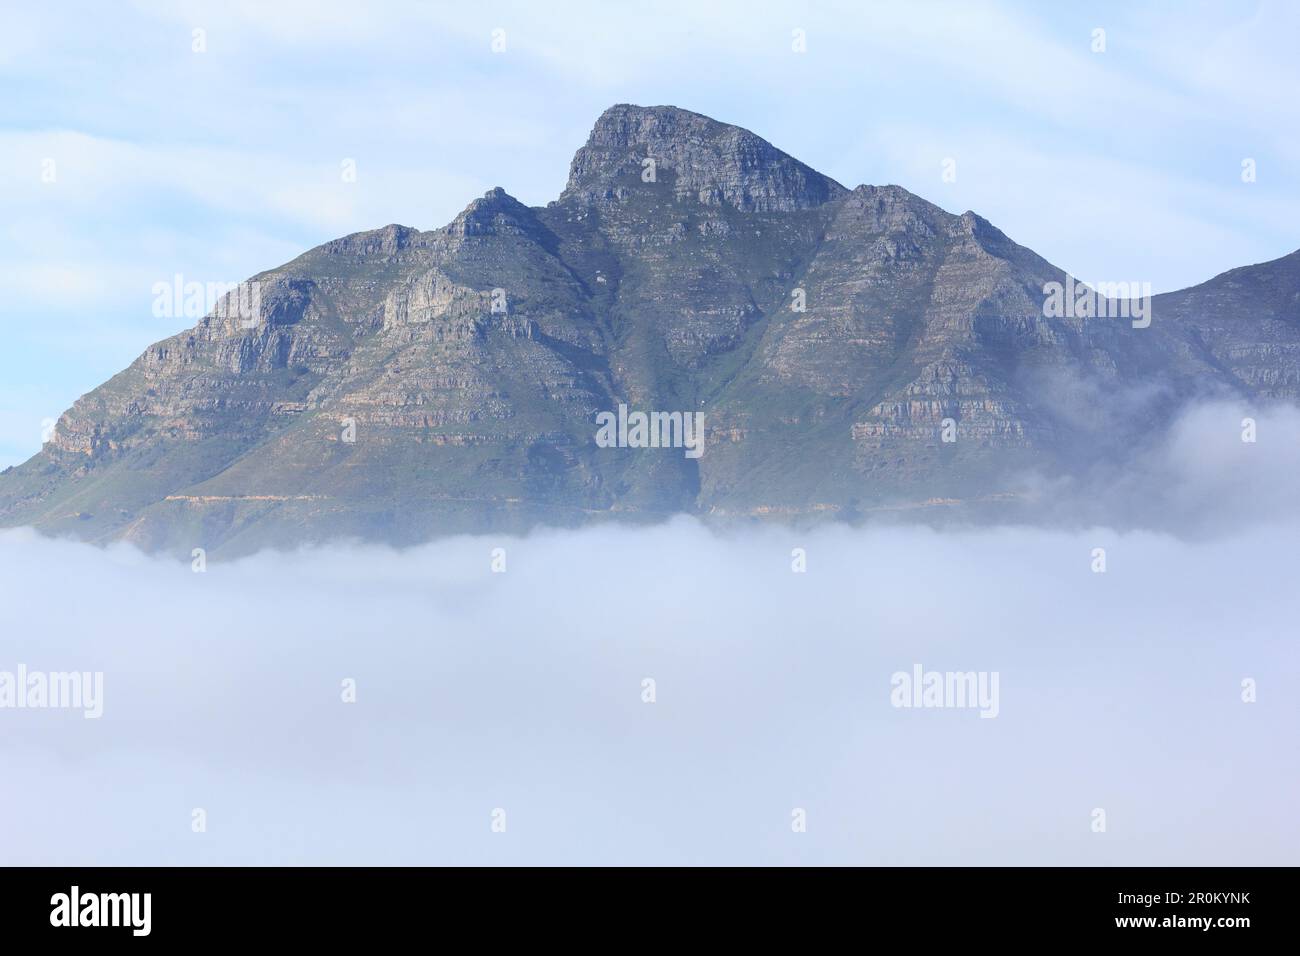 Devils Peak photographed in May, Cape Town South Africa. Stock Photo